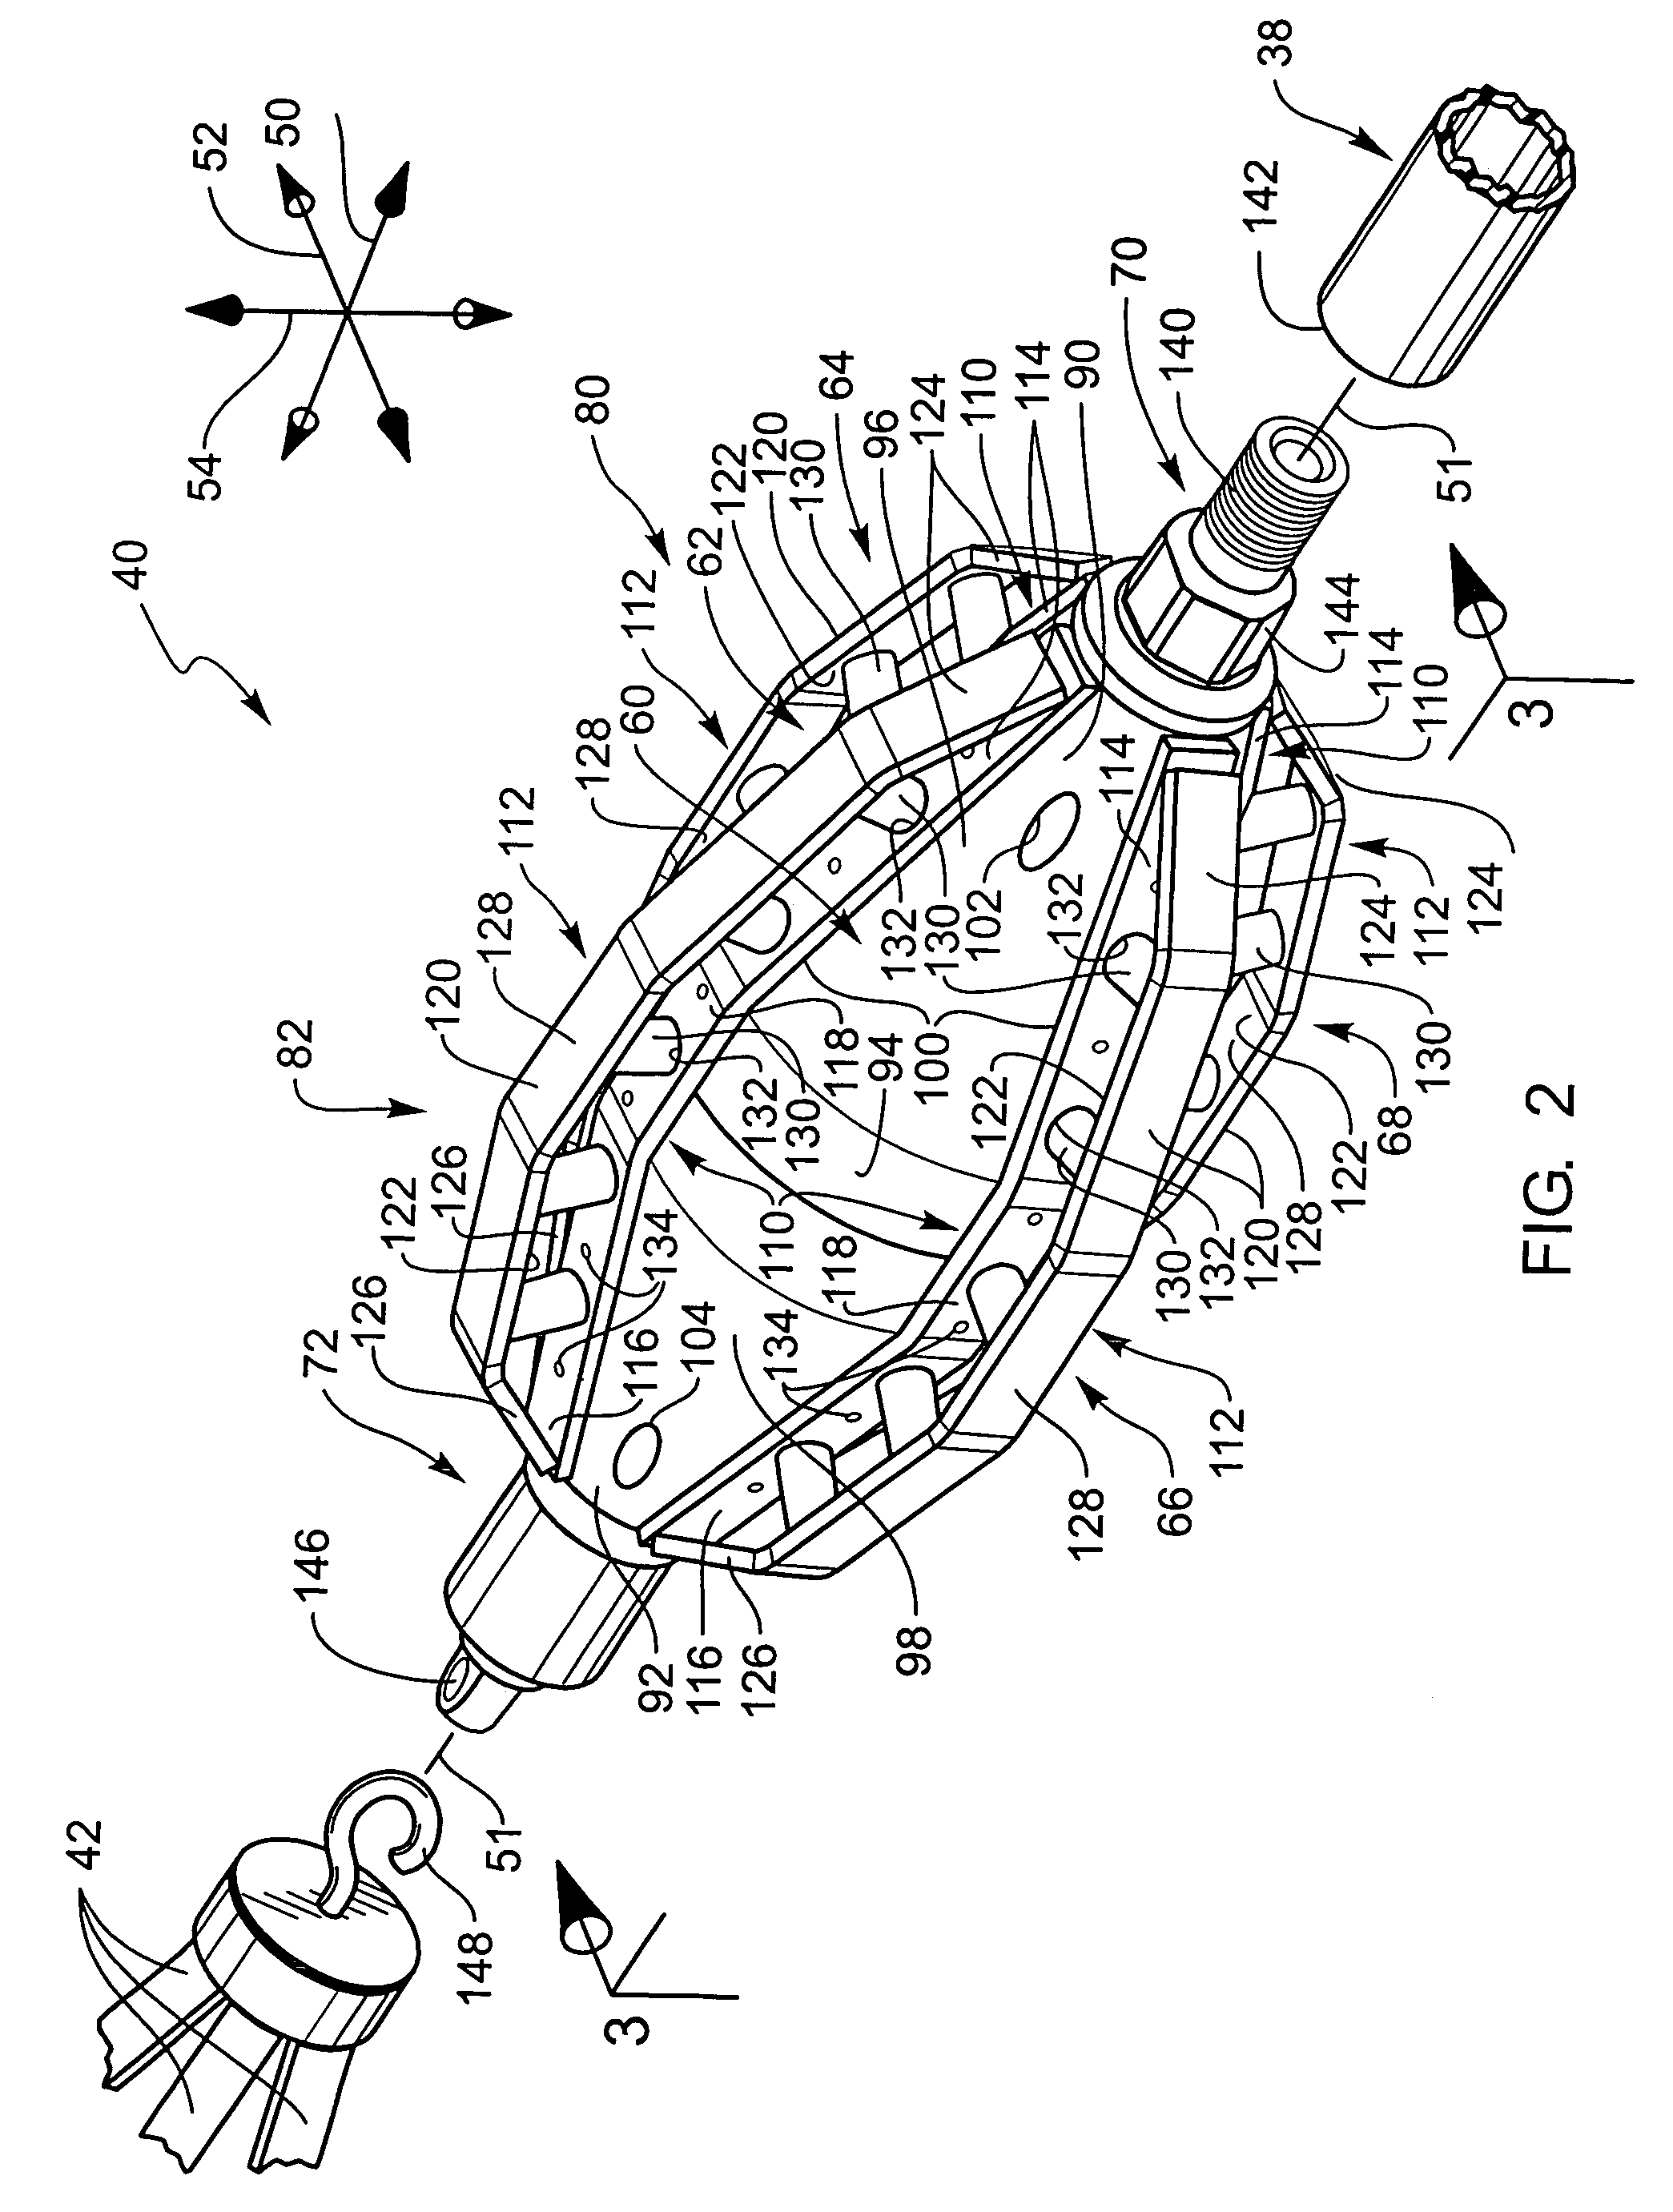 Hole reaming apparatus and method